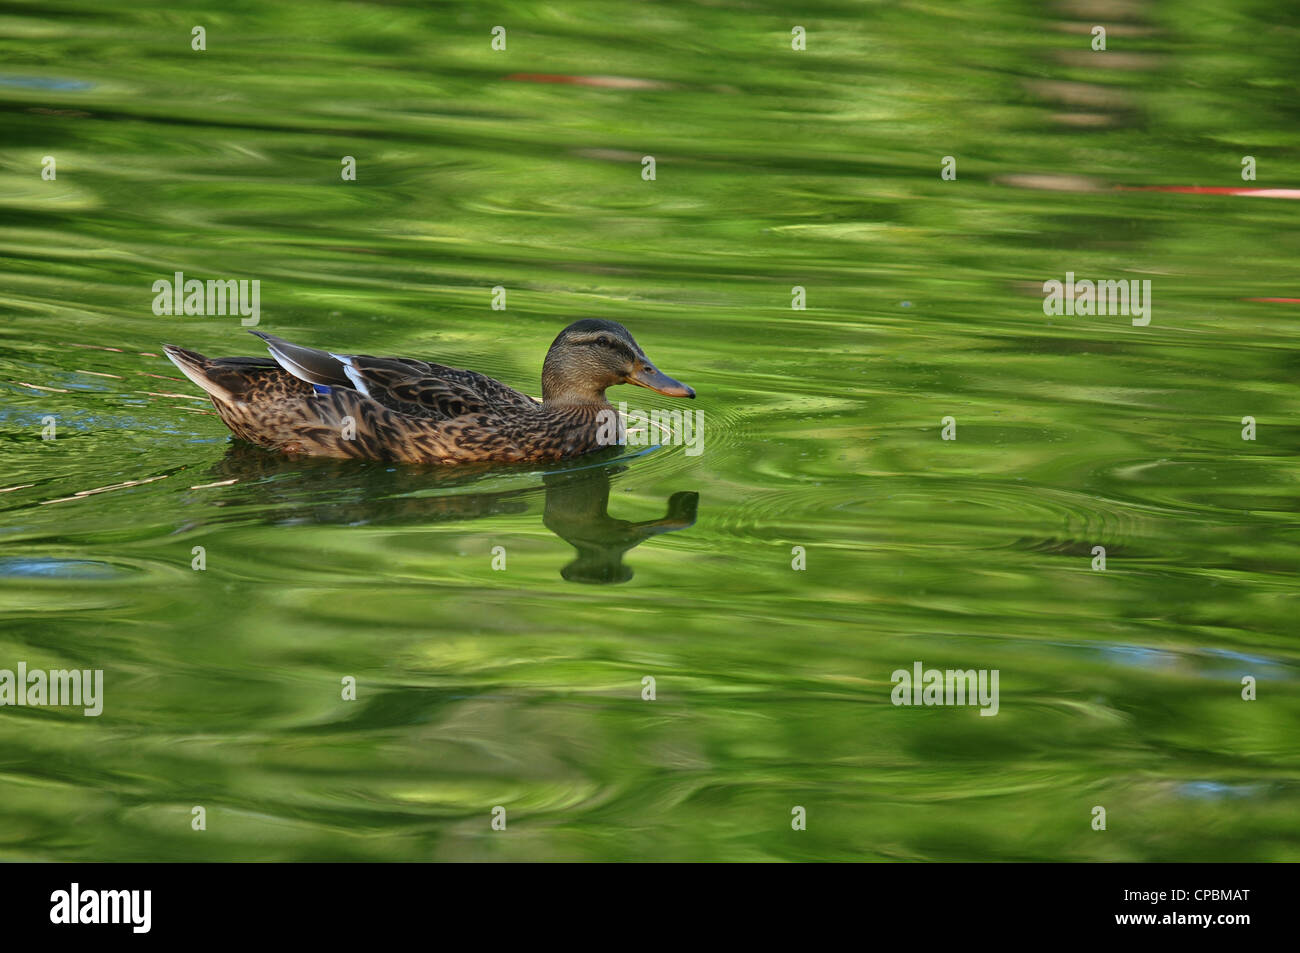 female wood duck swimming in green reflecting pond water Stock Photo